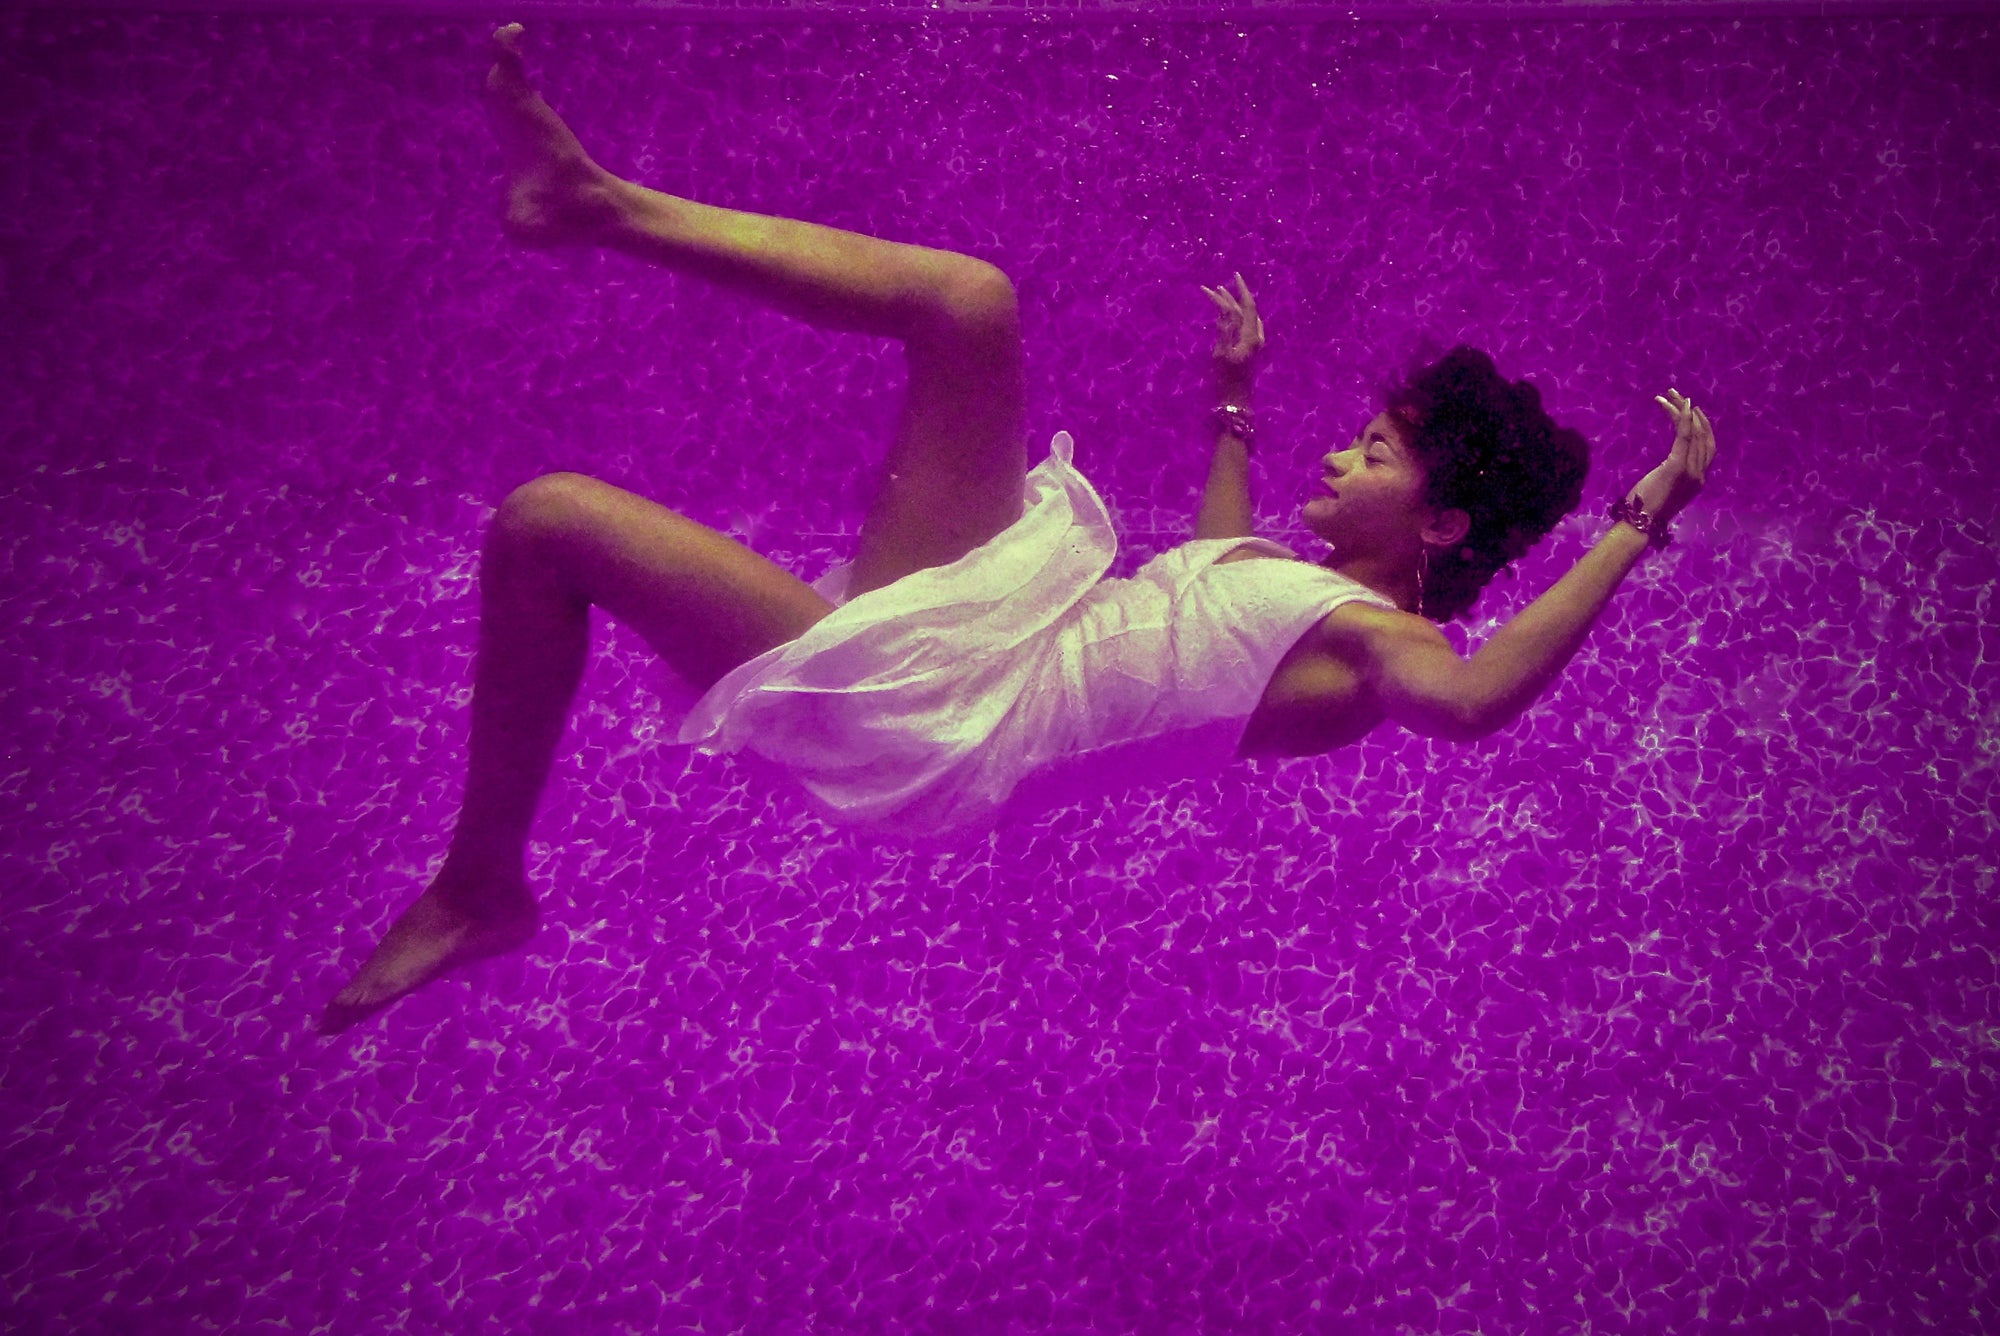 A woman falls into water, symbolizing the sensation of dreaming. 